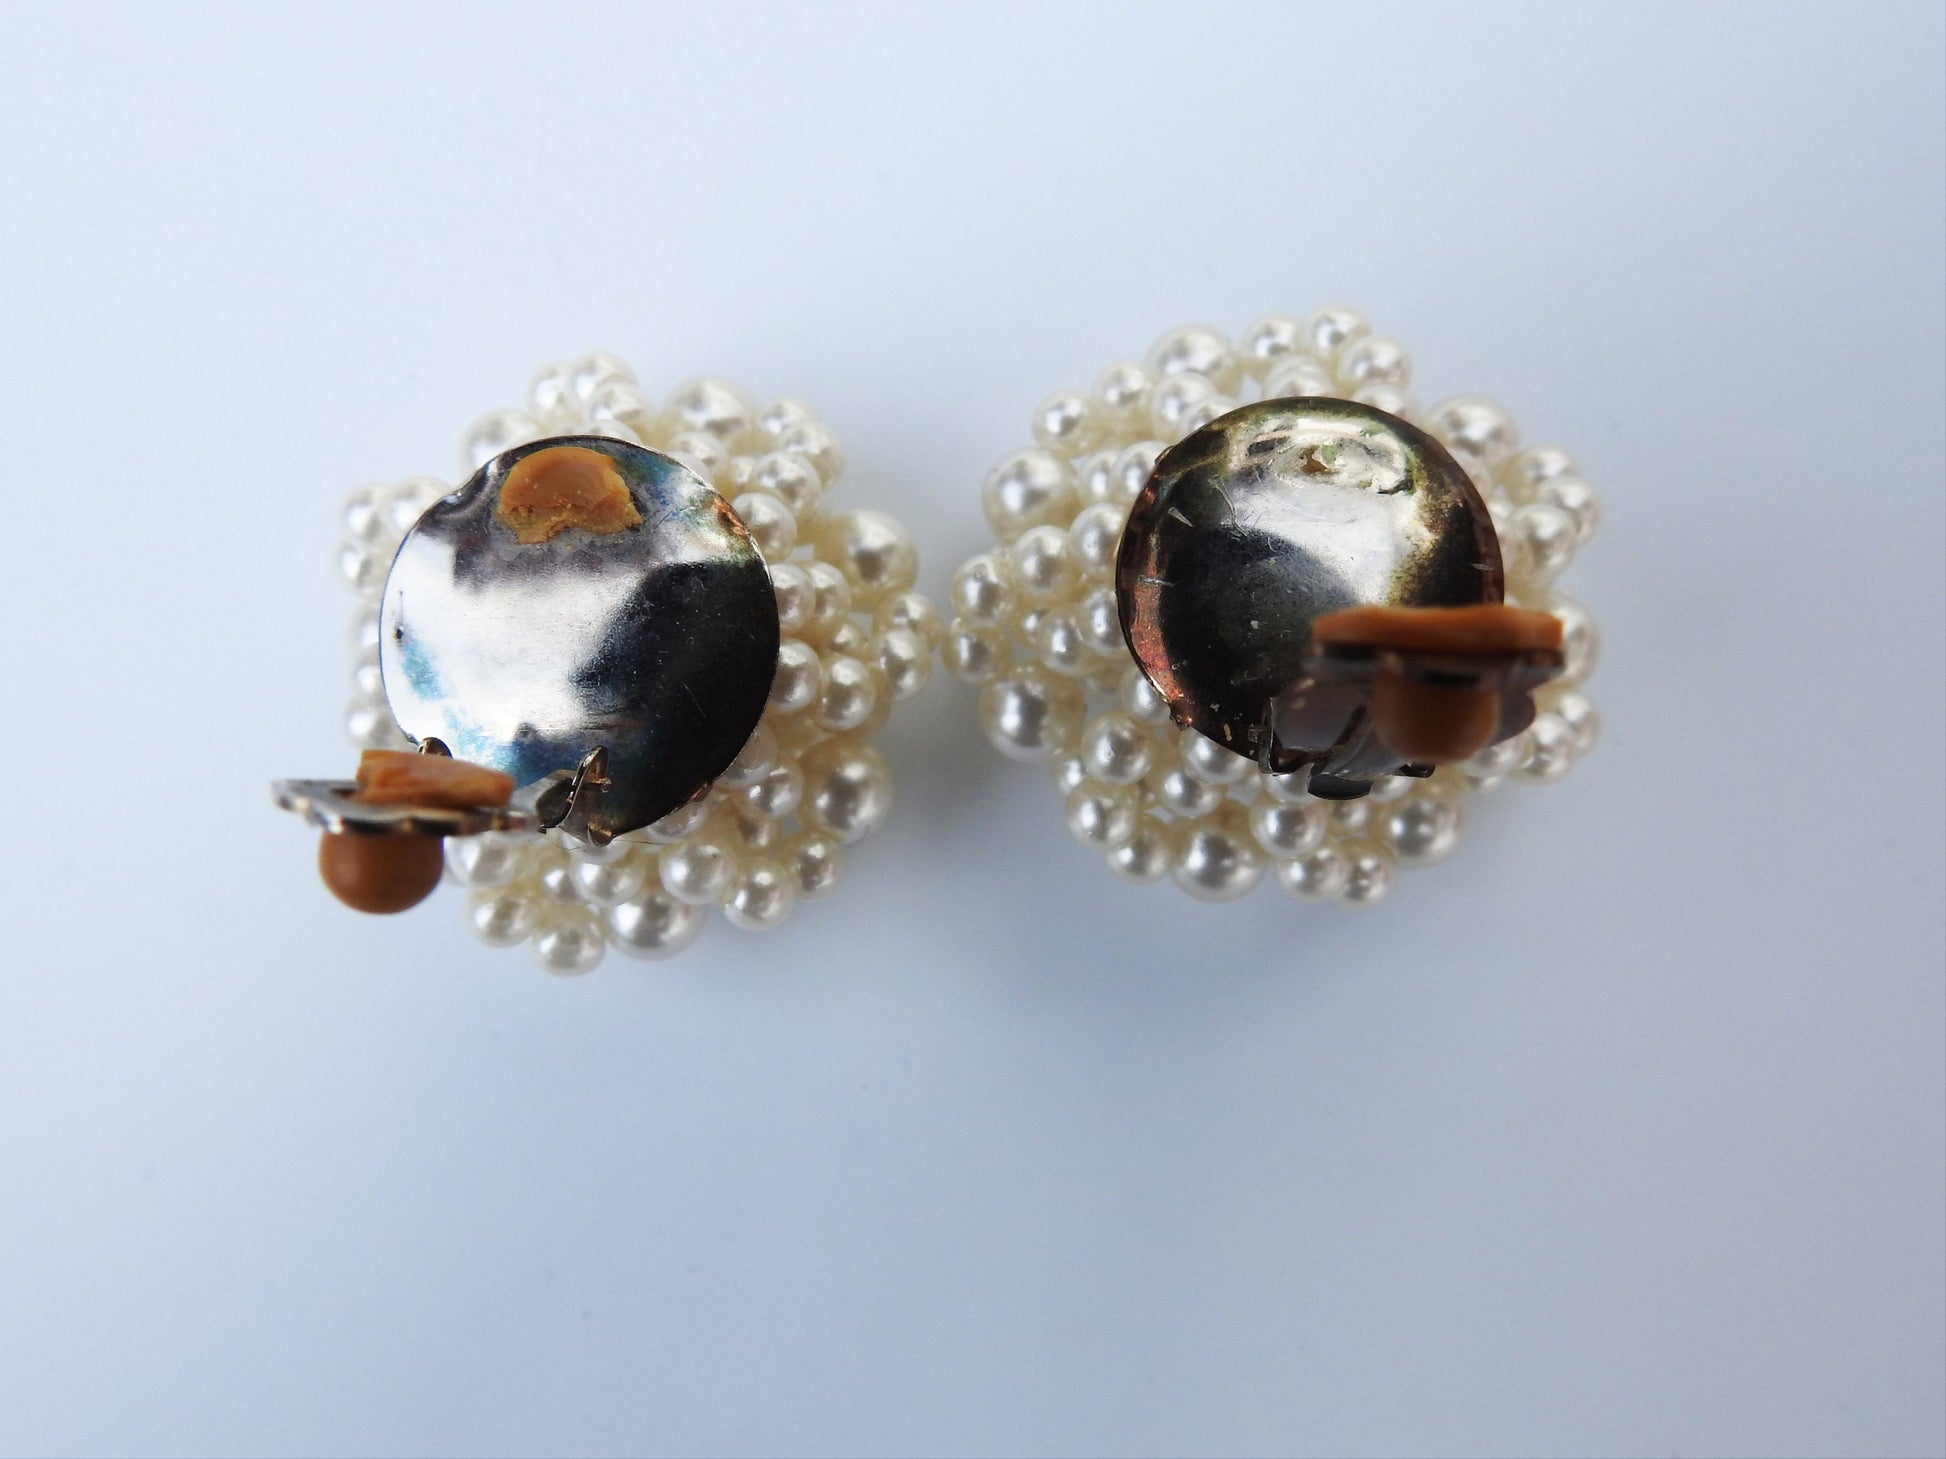 Large pearl cluster clip on earrings, vintage, with faux pearls and old-fashioned charm. Great gift for mom, sister, grandma